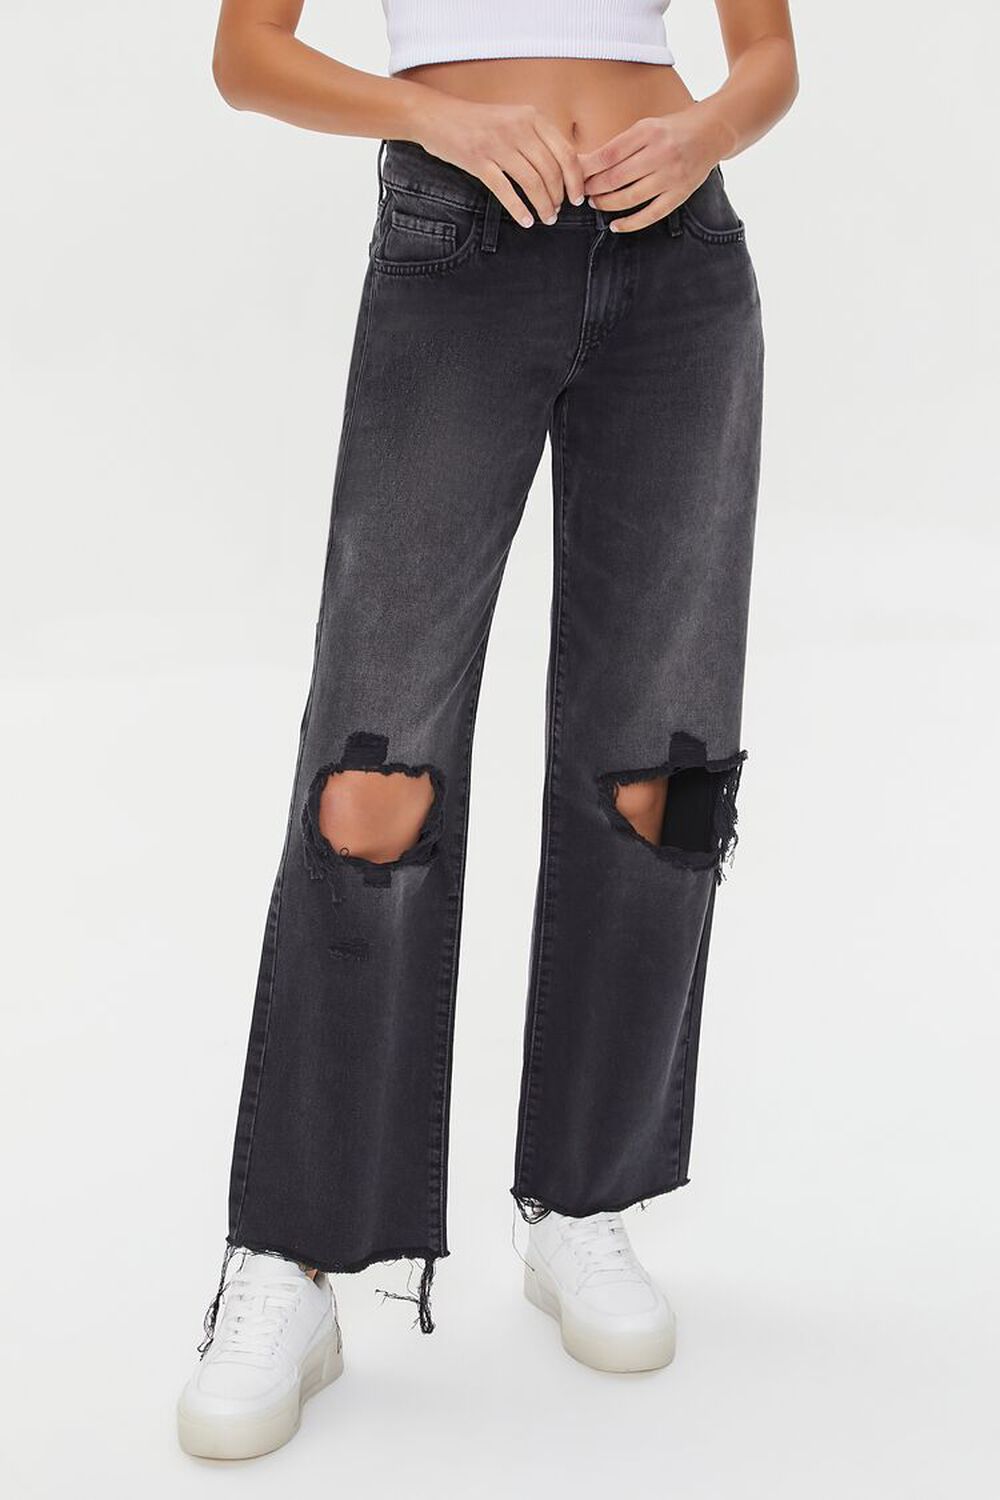 WASHED BLACK Recycled Cotton Low-Rise Straight-Leg Jeans, image 2